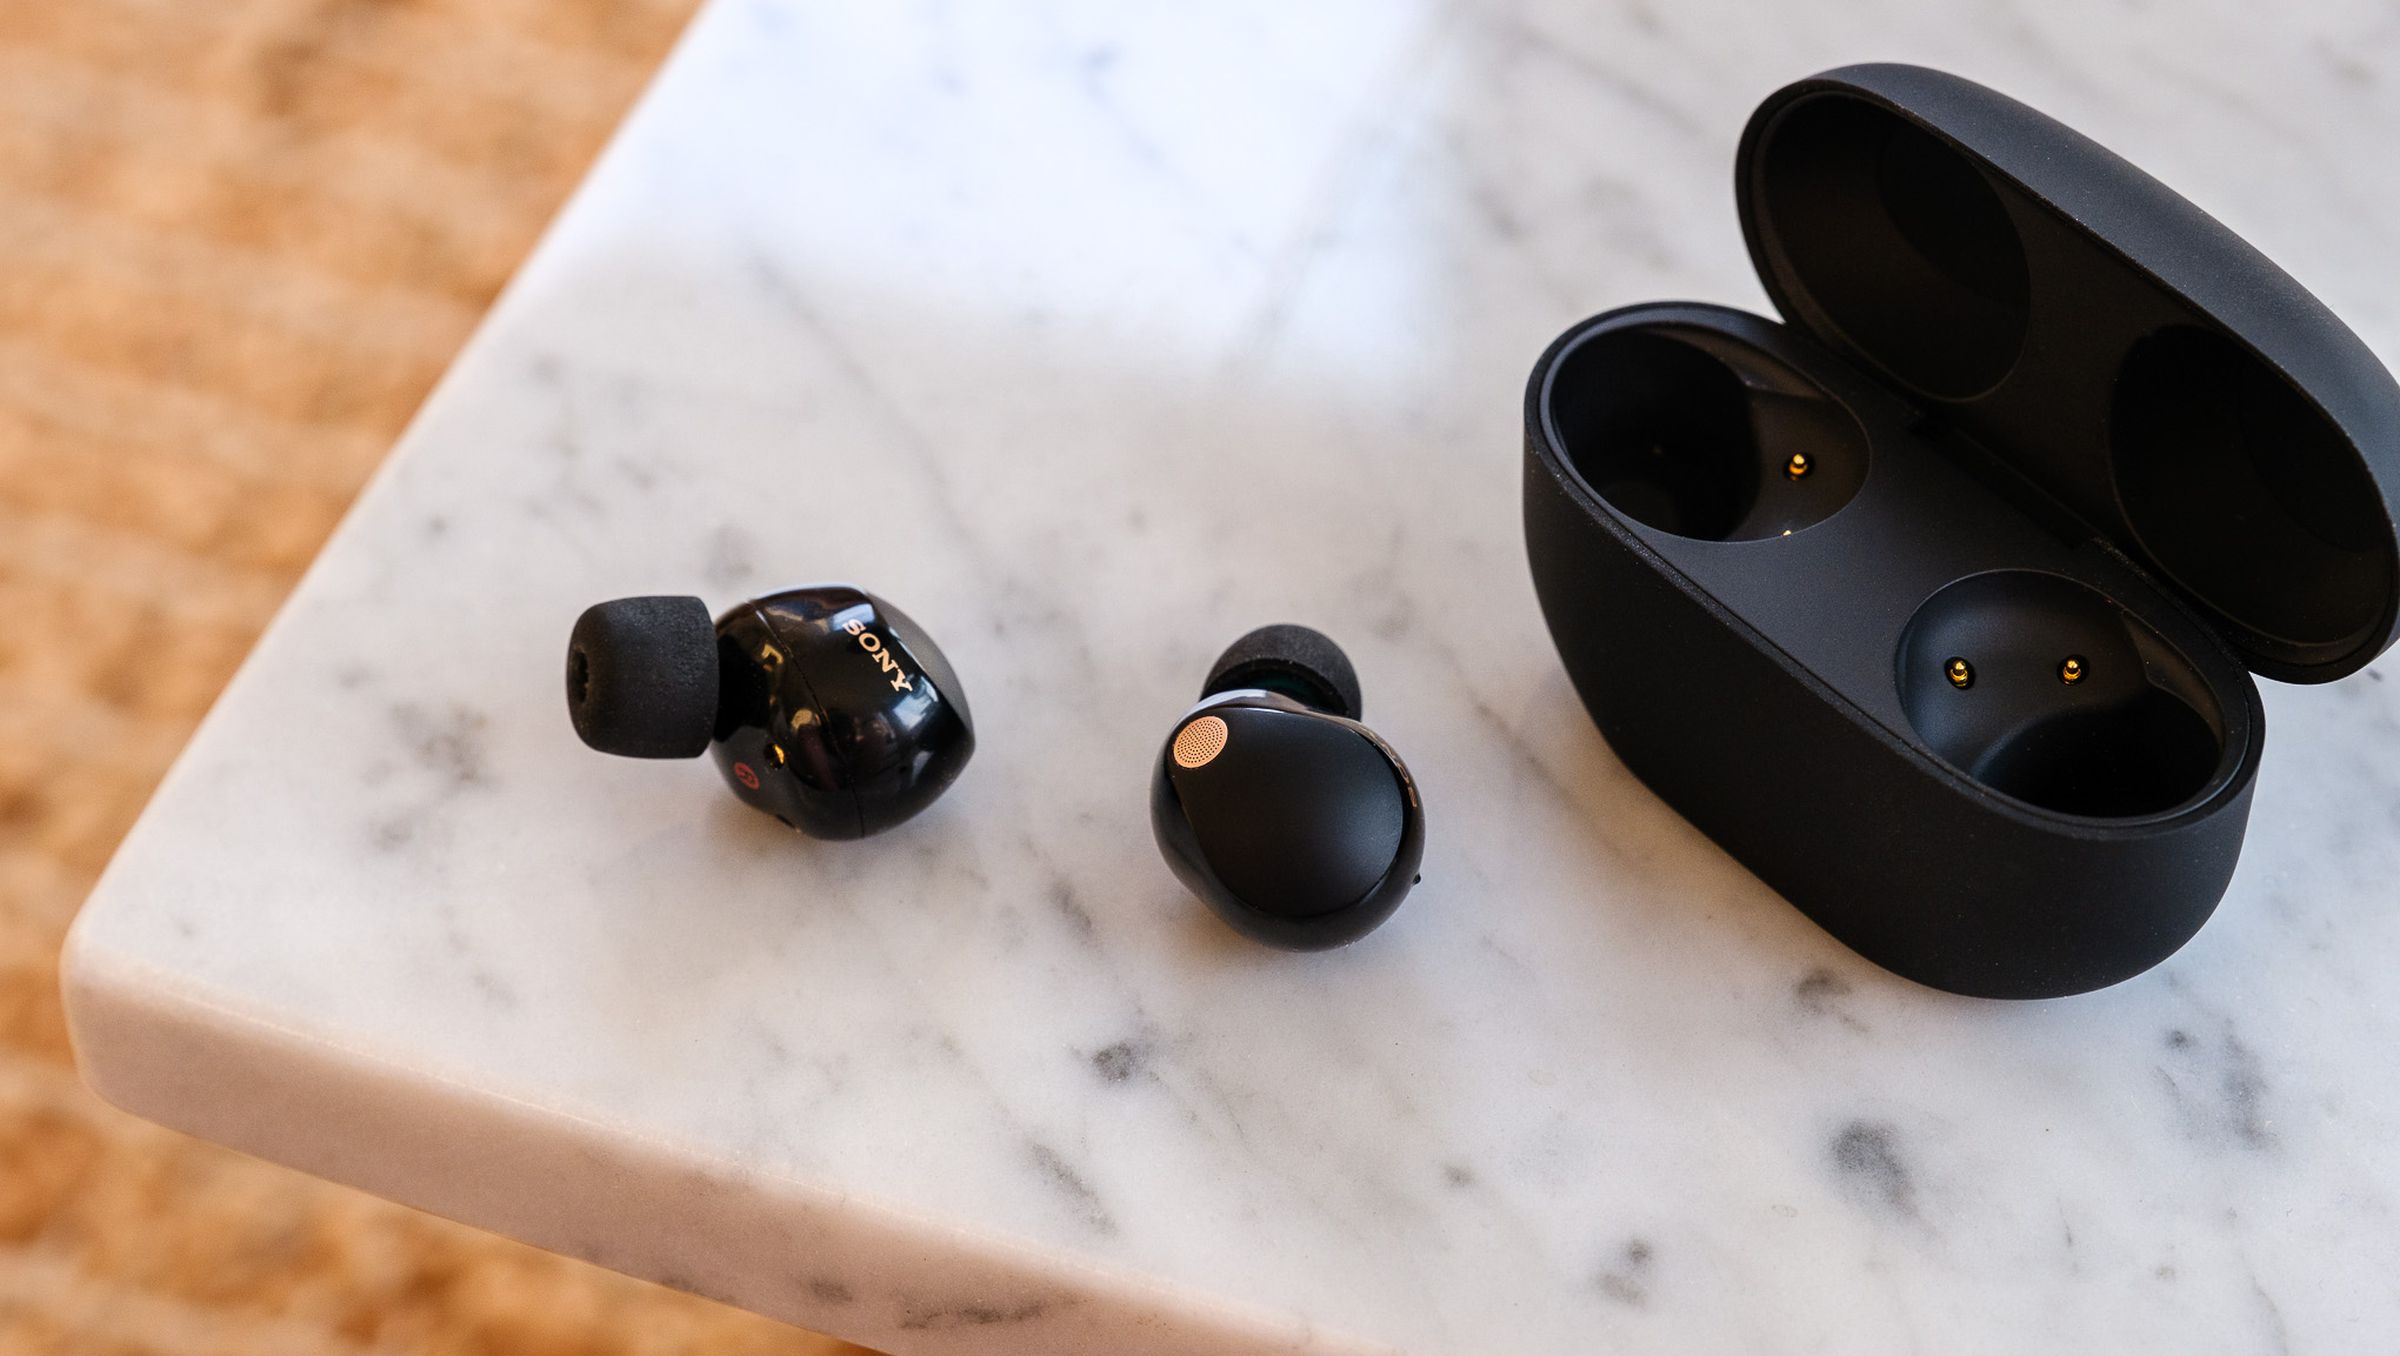 How To Find My Wireless Earbuds